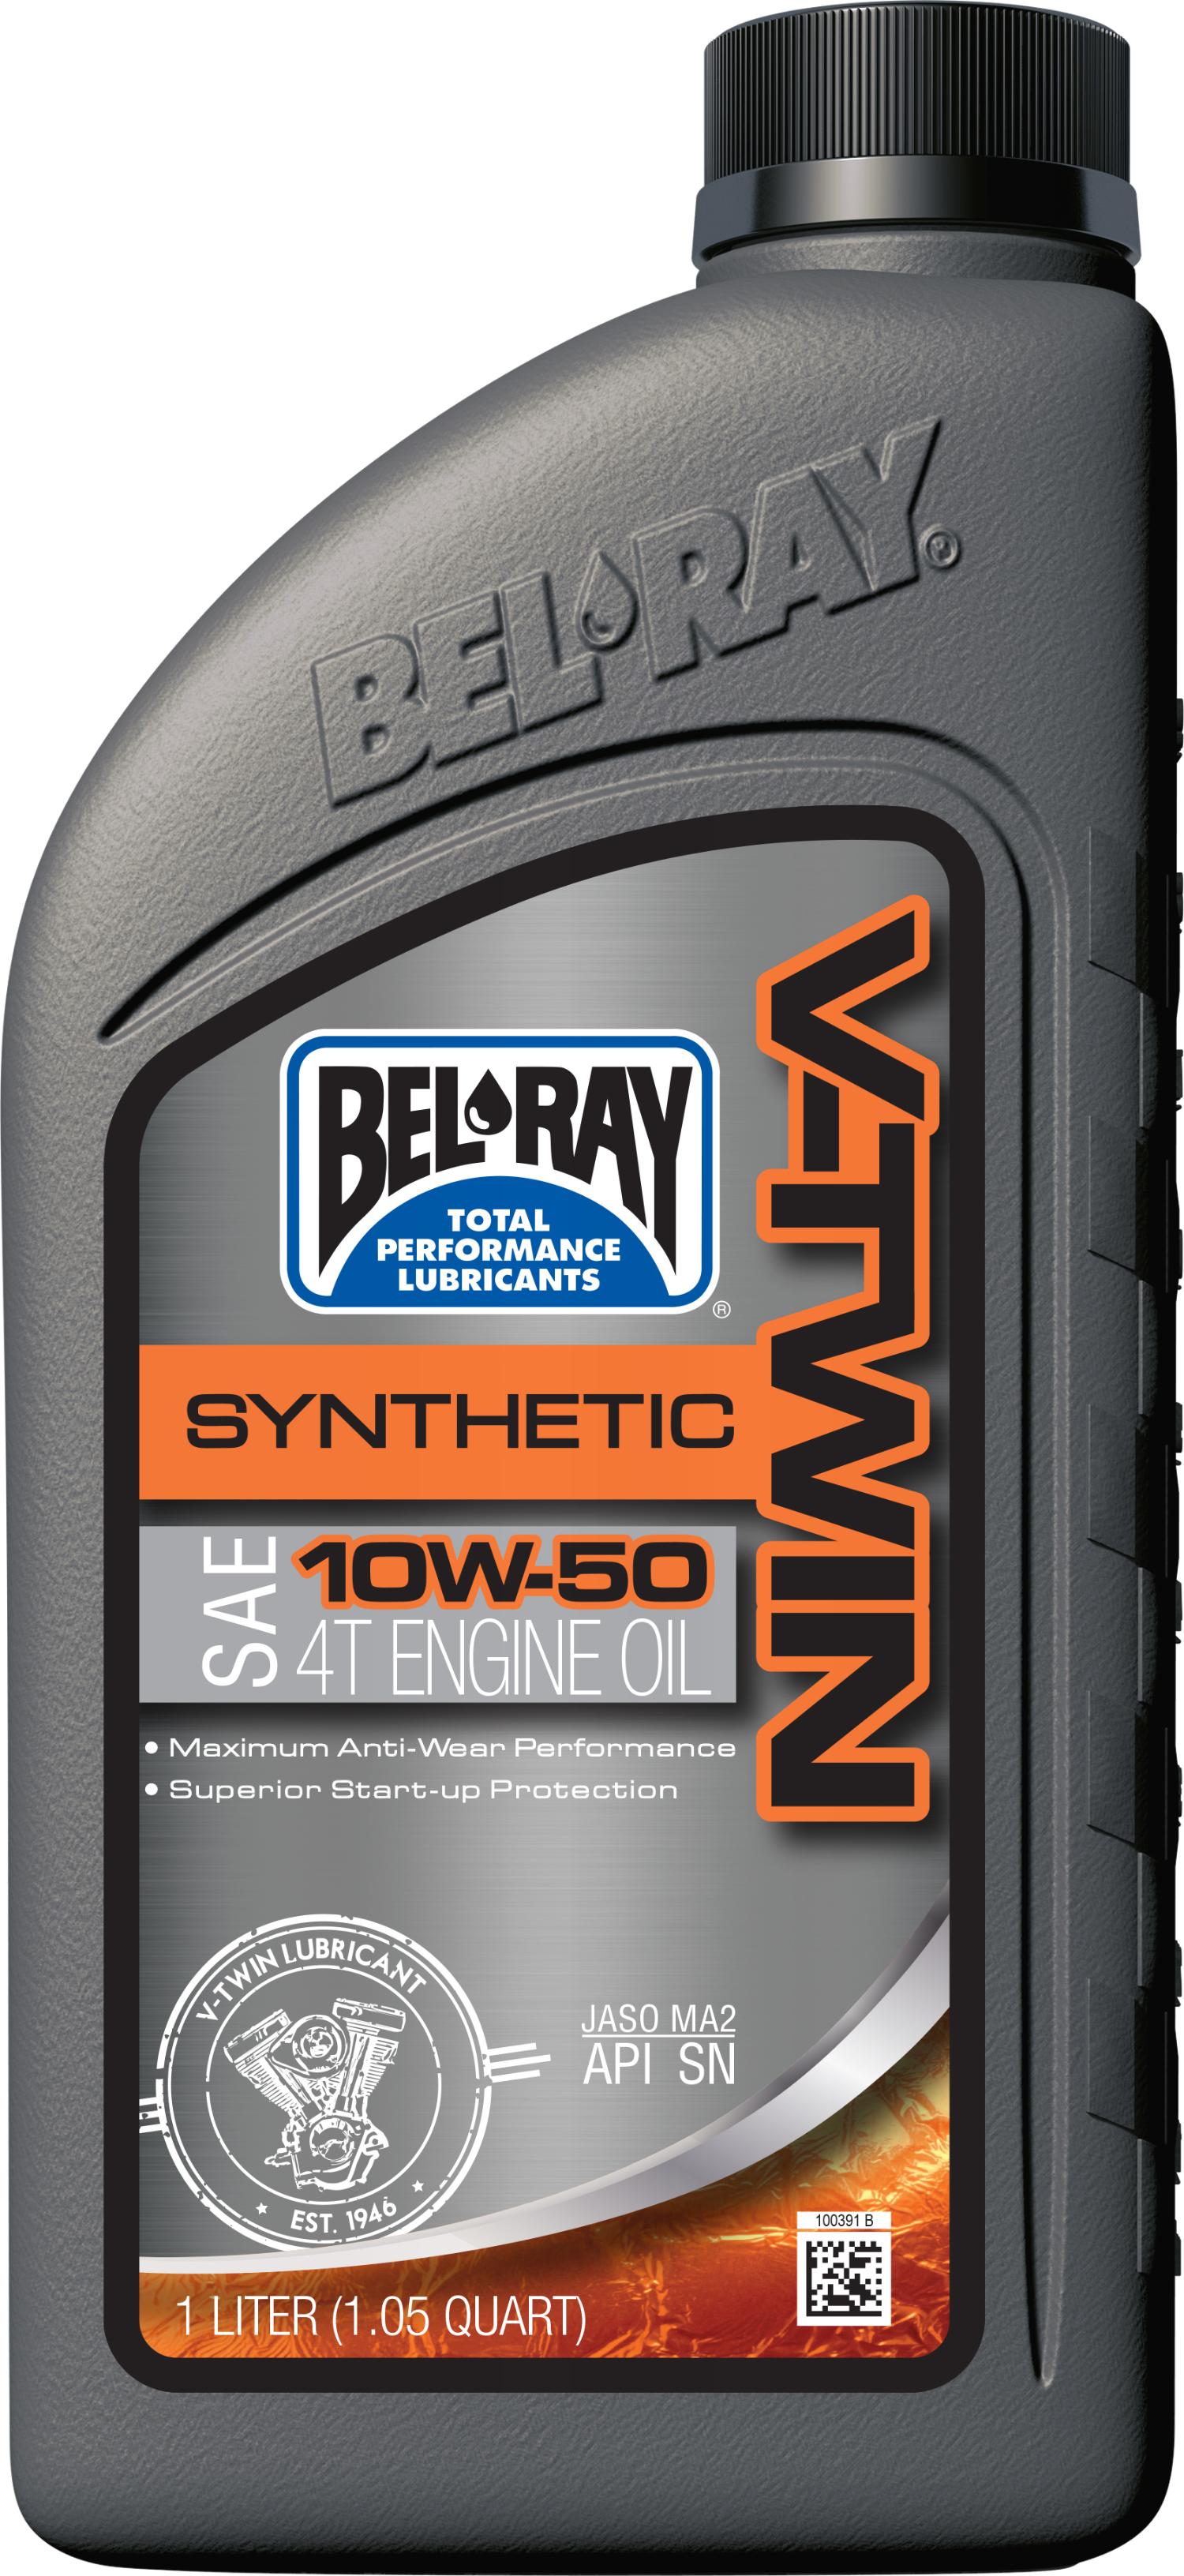 Bel-ray - V-twin Synthetic Engine Oil 10w-50 1l - 96915-BT1